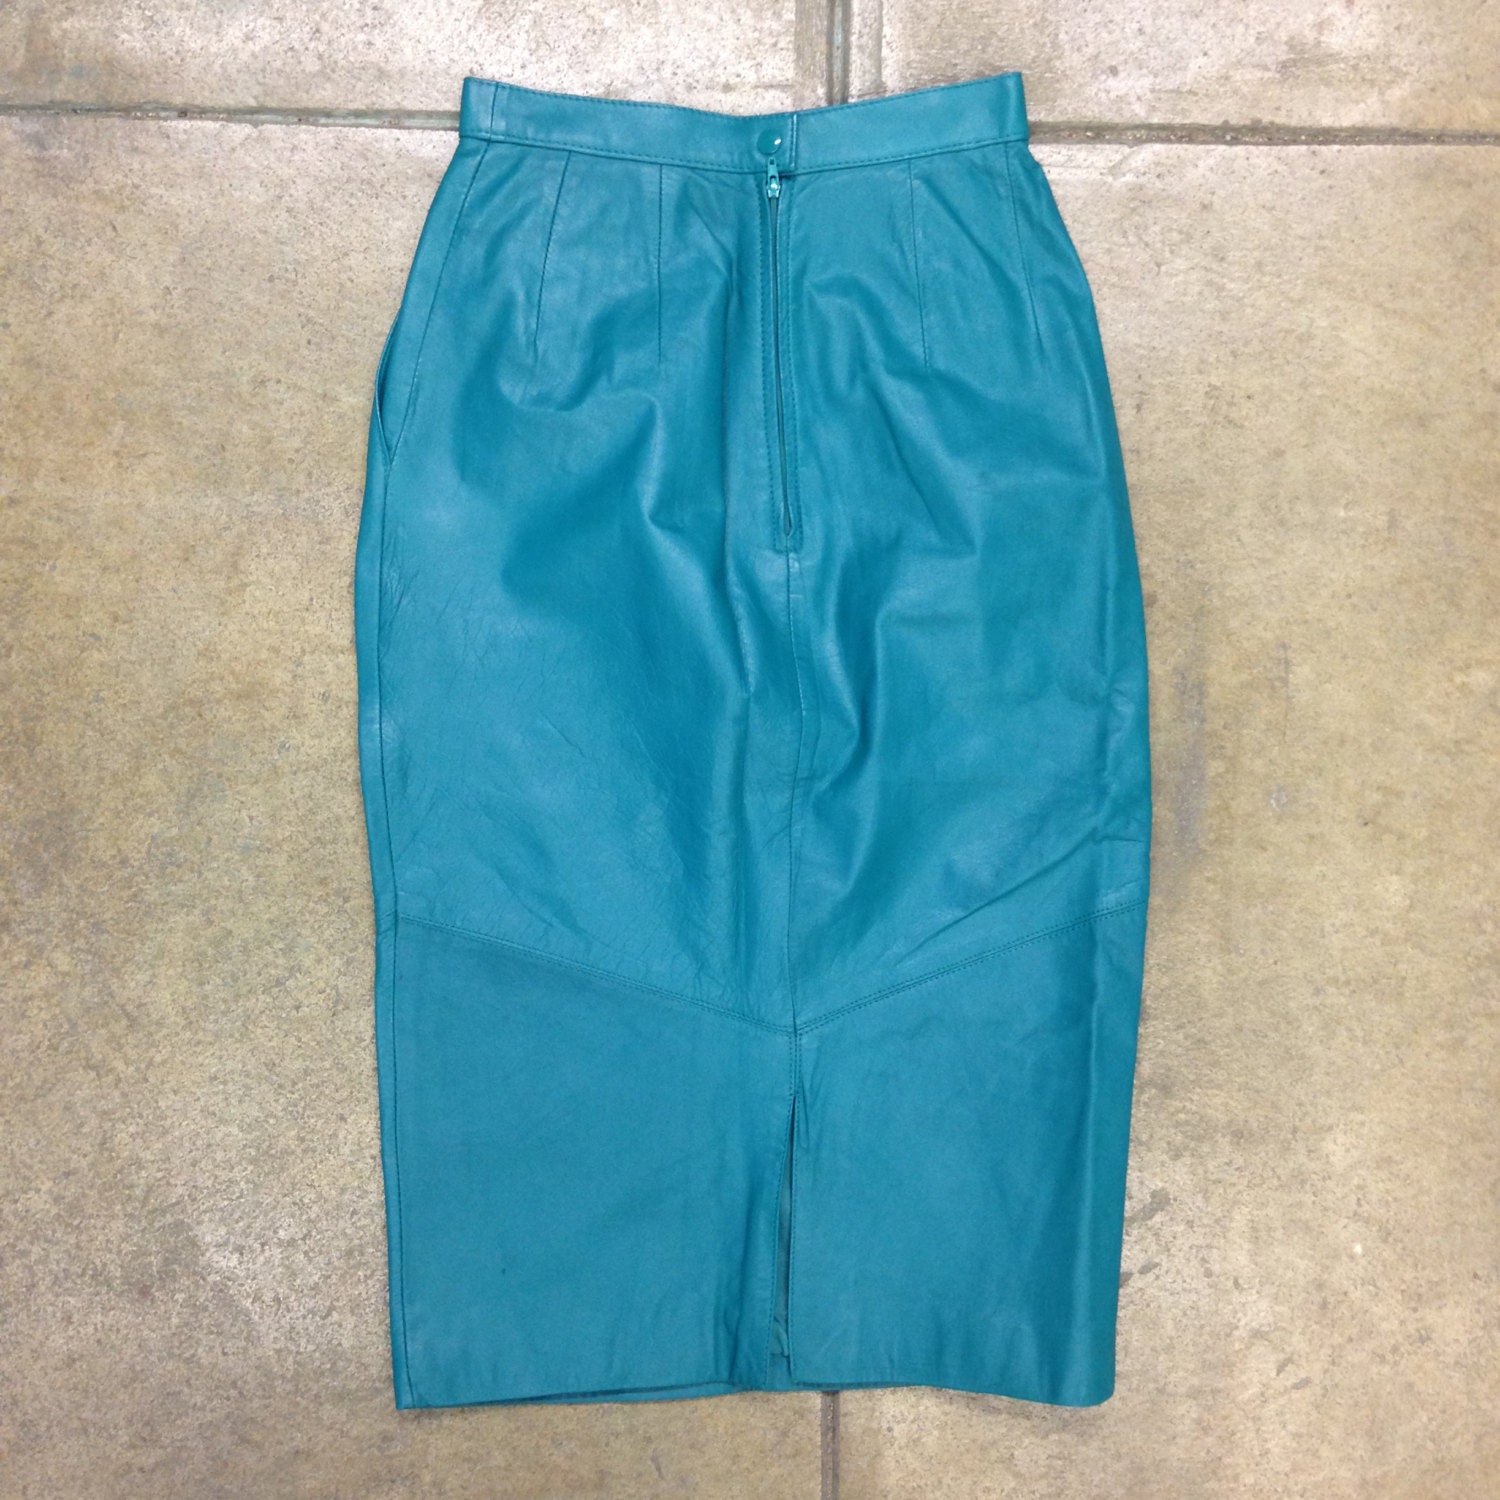 Vintage Women's Pelle Cuir Turquoise Leather Skirt Size 4